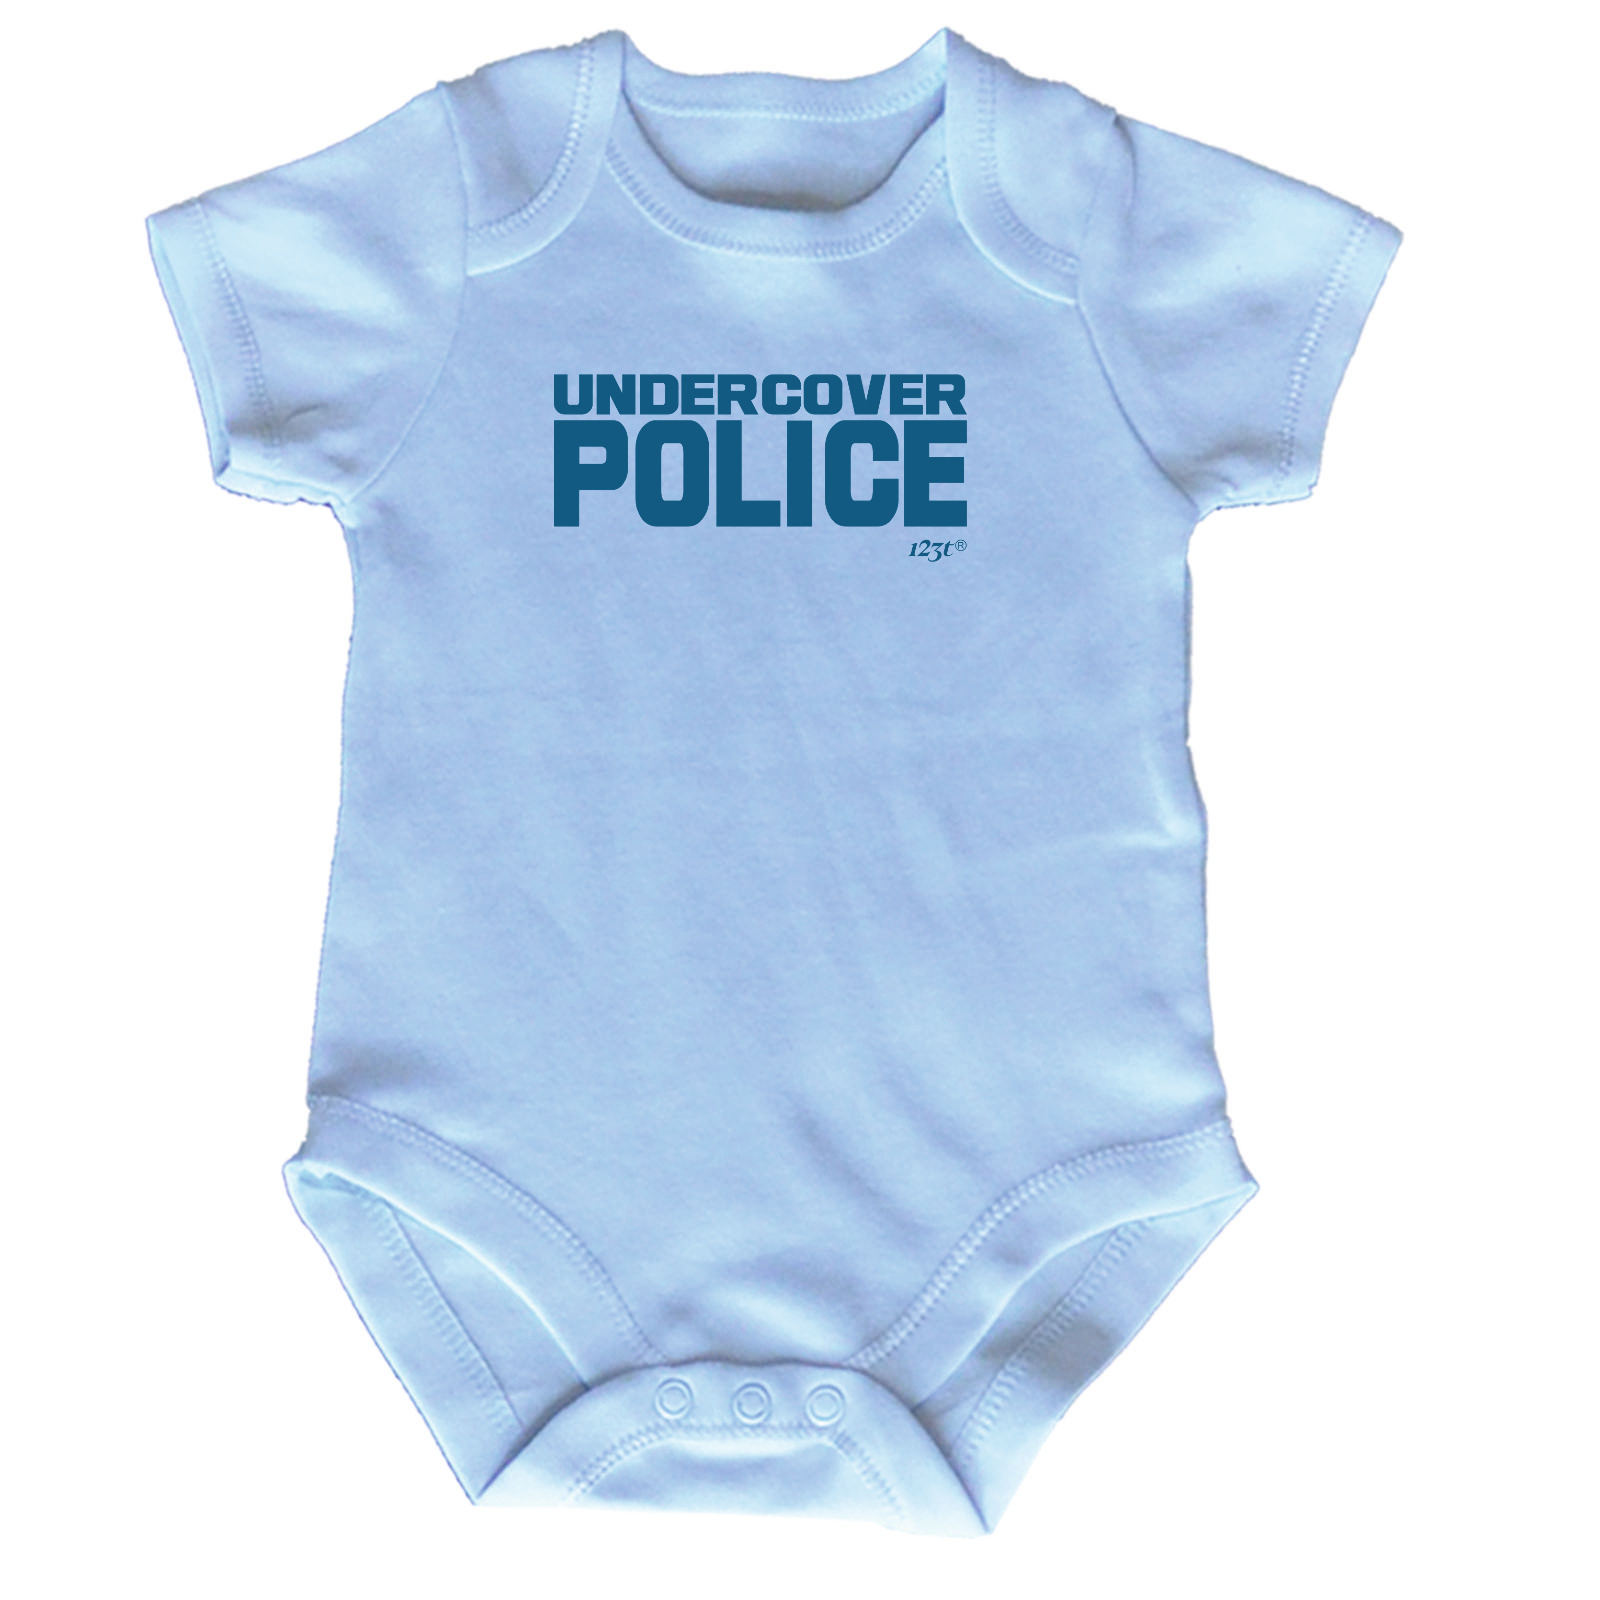 Undercover Police Funny Baby Infants Babygrow Romper Jumpsuit 